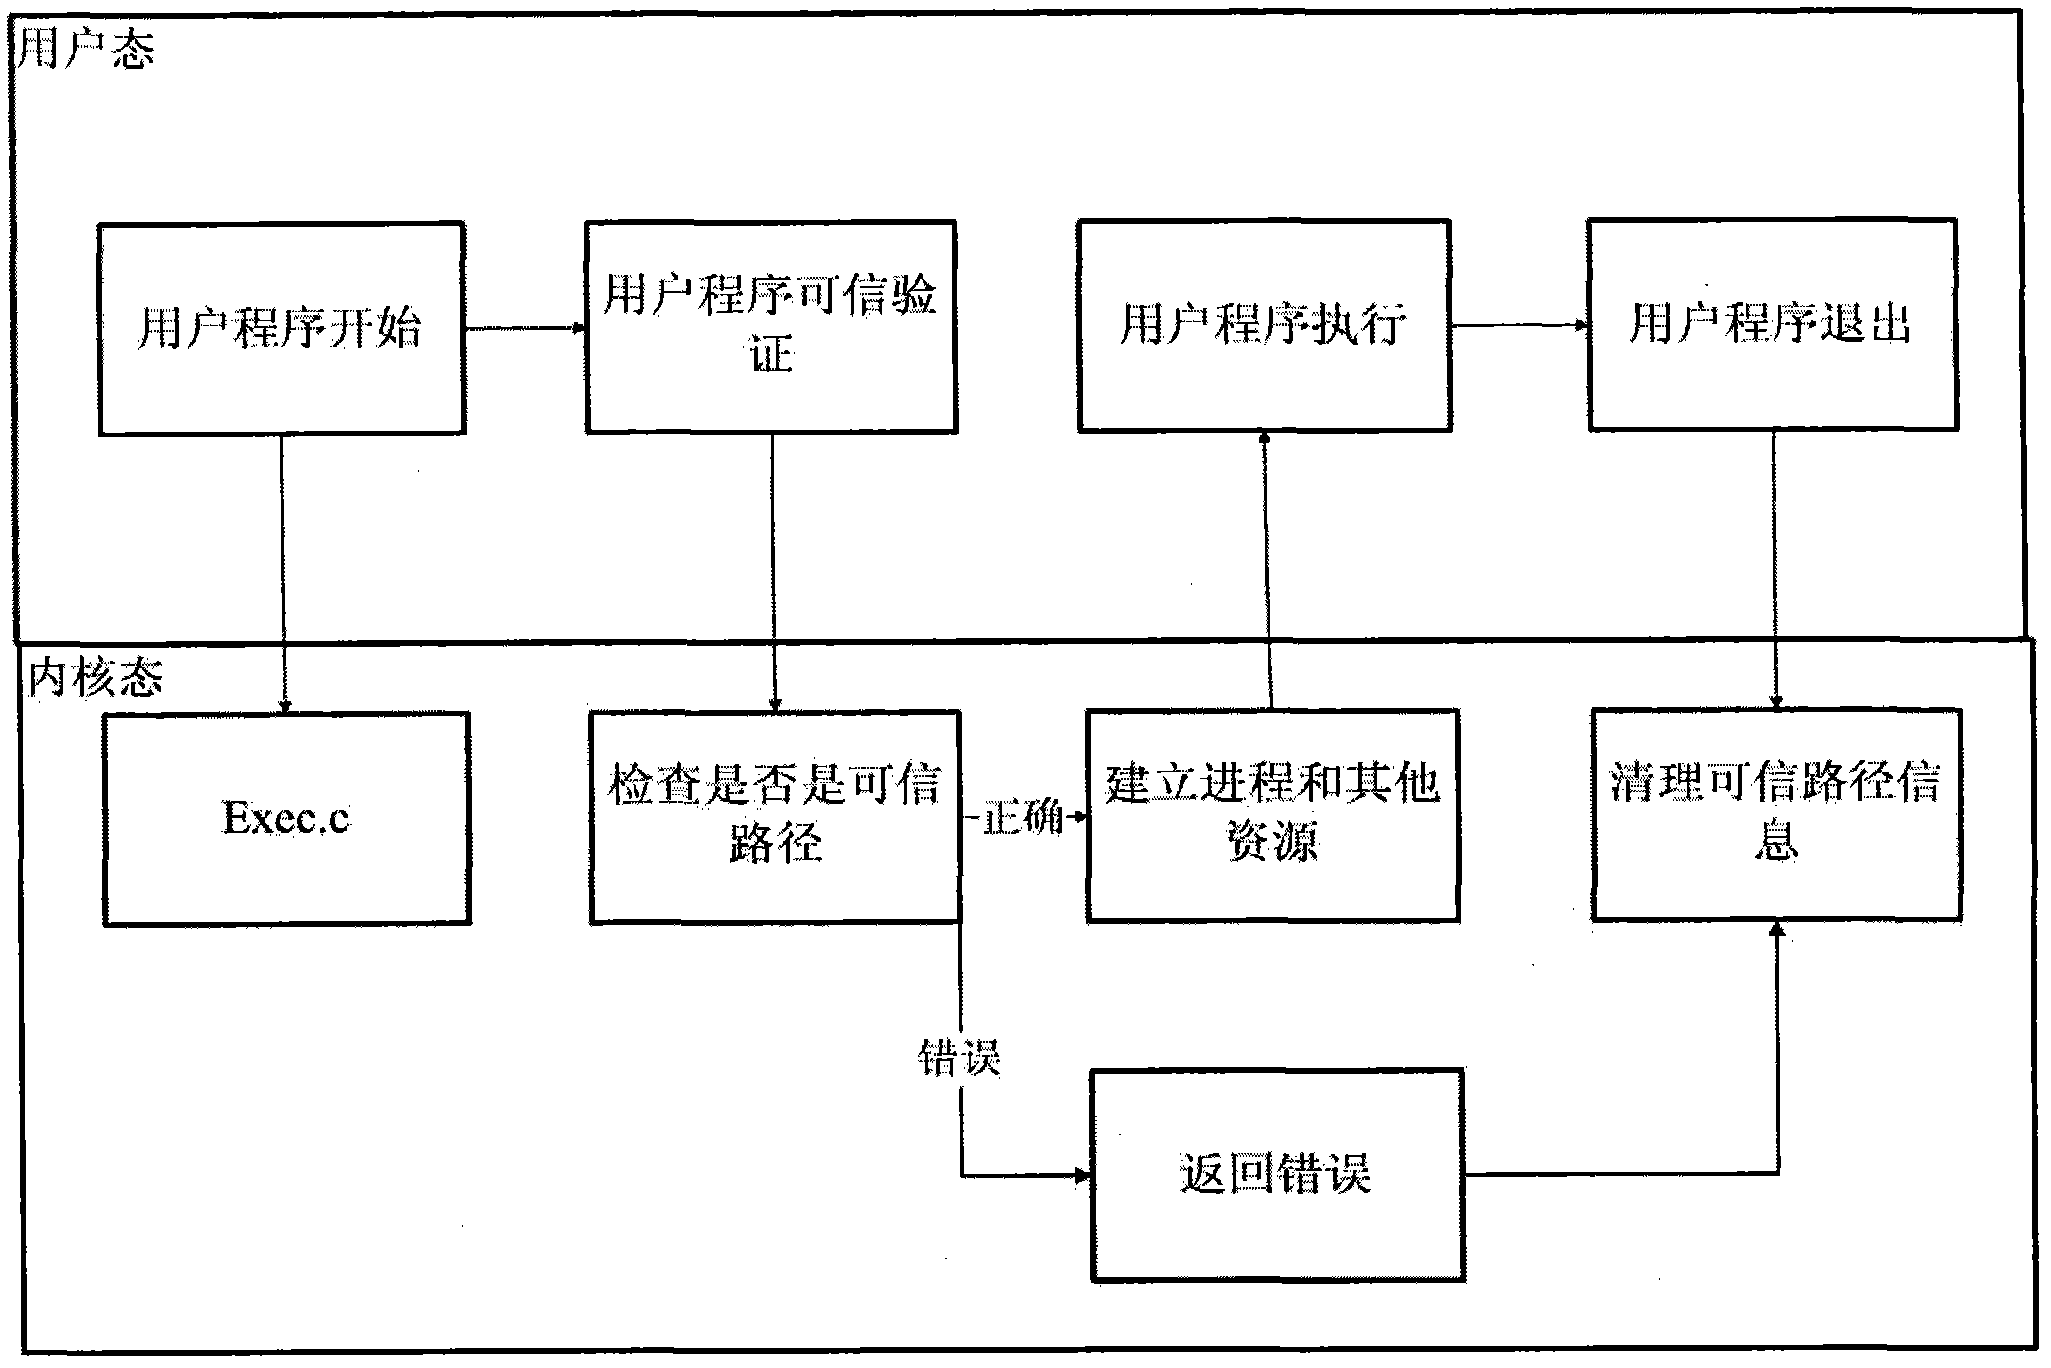 Method for establishing trusted path in secure operating system